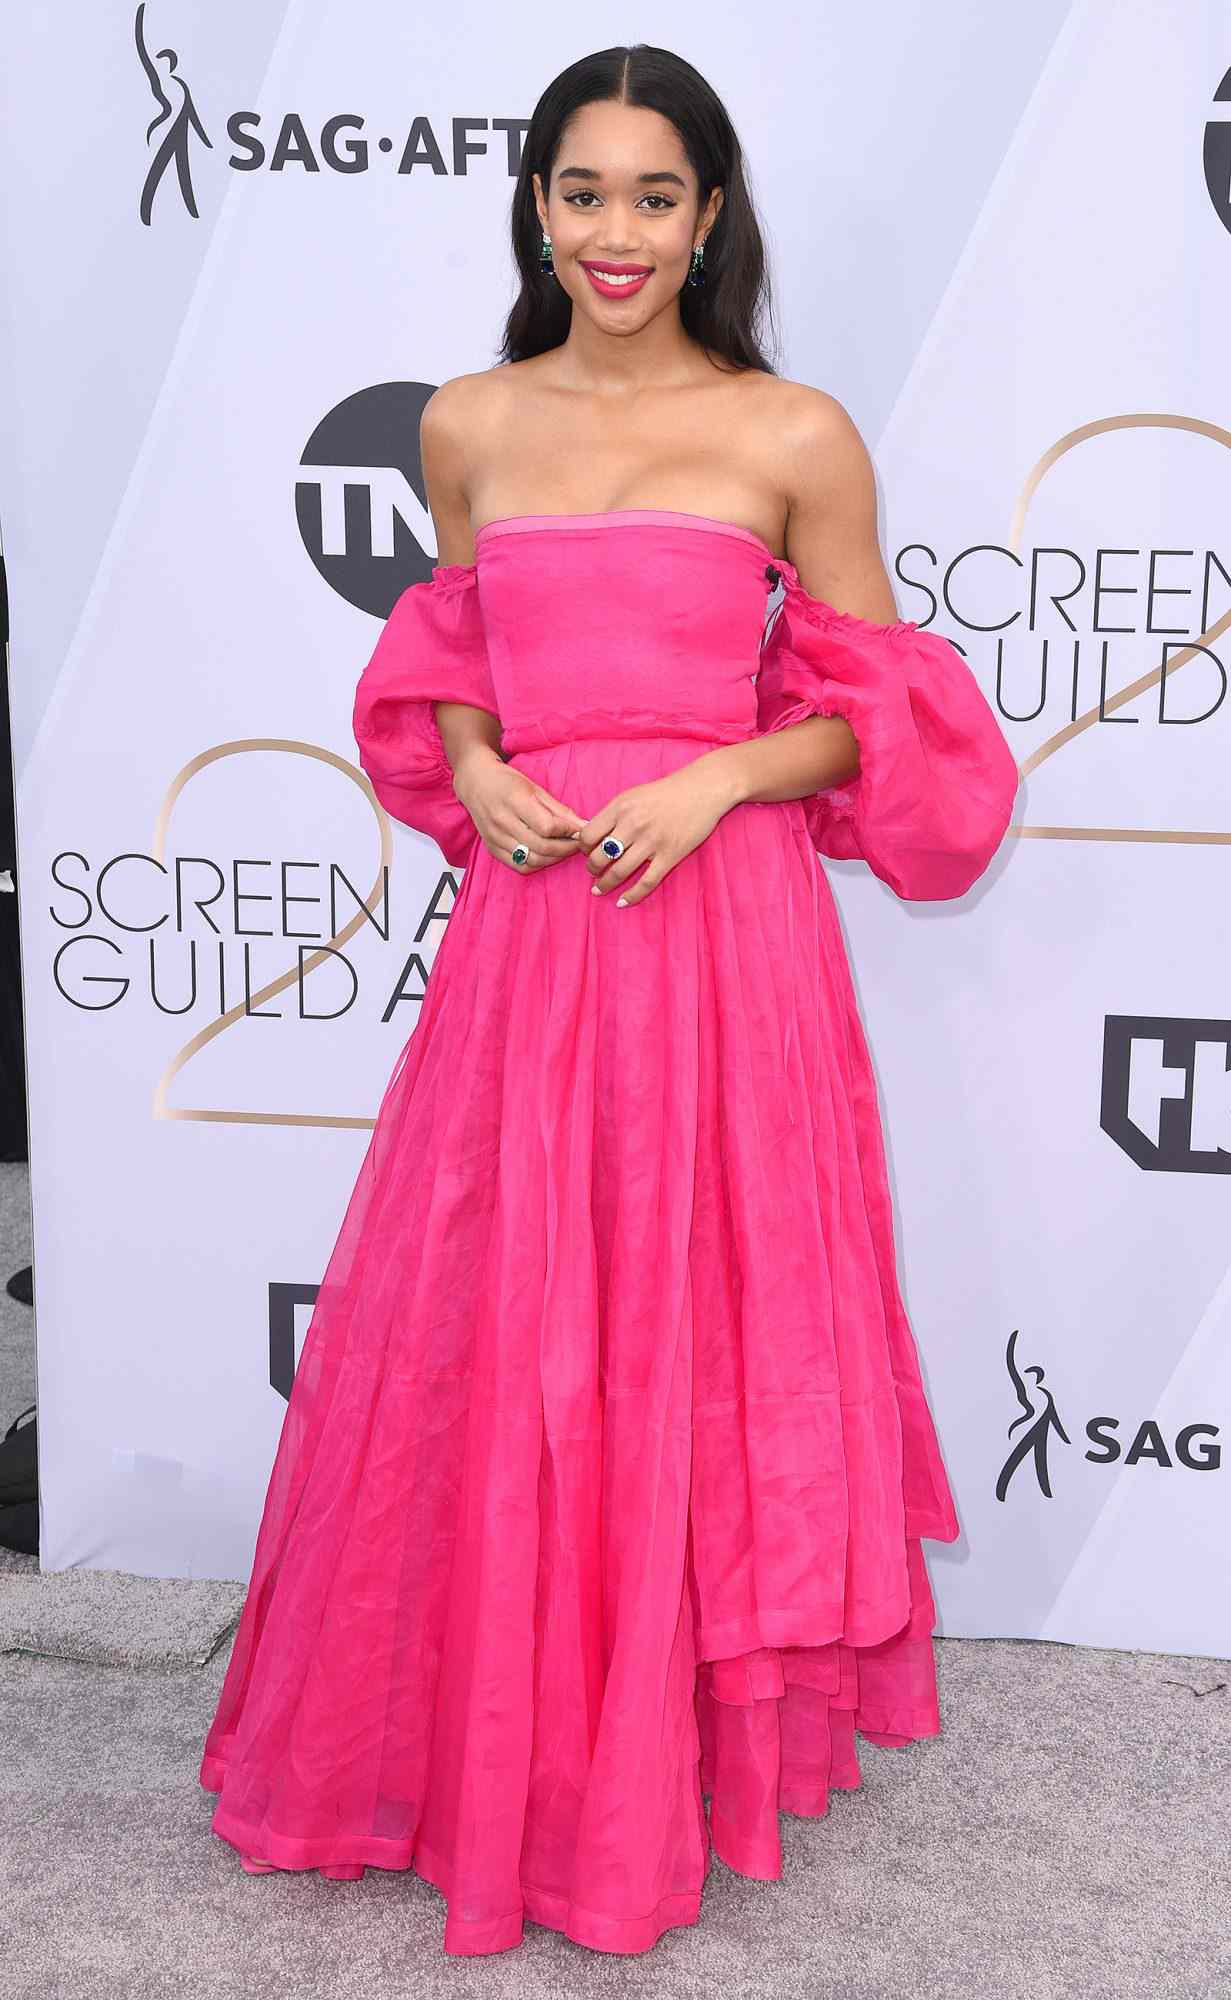 25th Annual Screen Actors Guild Awards, Arrivals, Los Angeles, USA - 27 Jan 2019